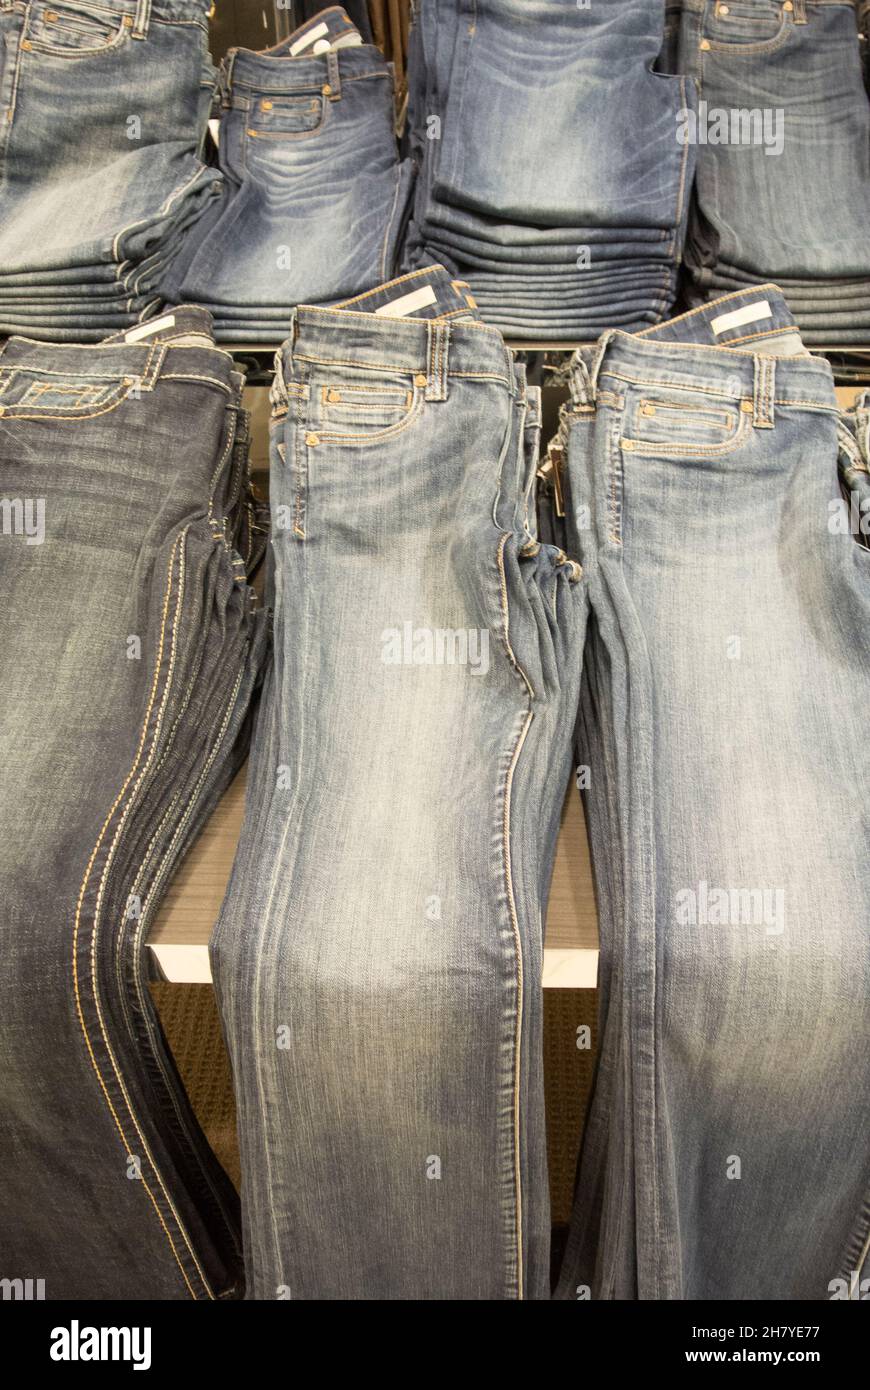 Store Display - Jeans Folded and Stacked on Table Stock Photo